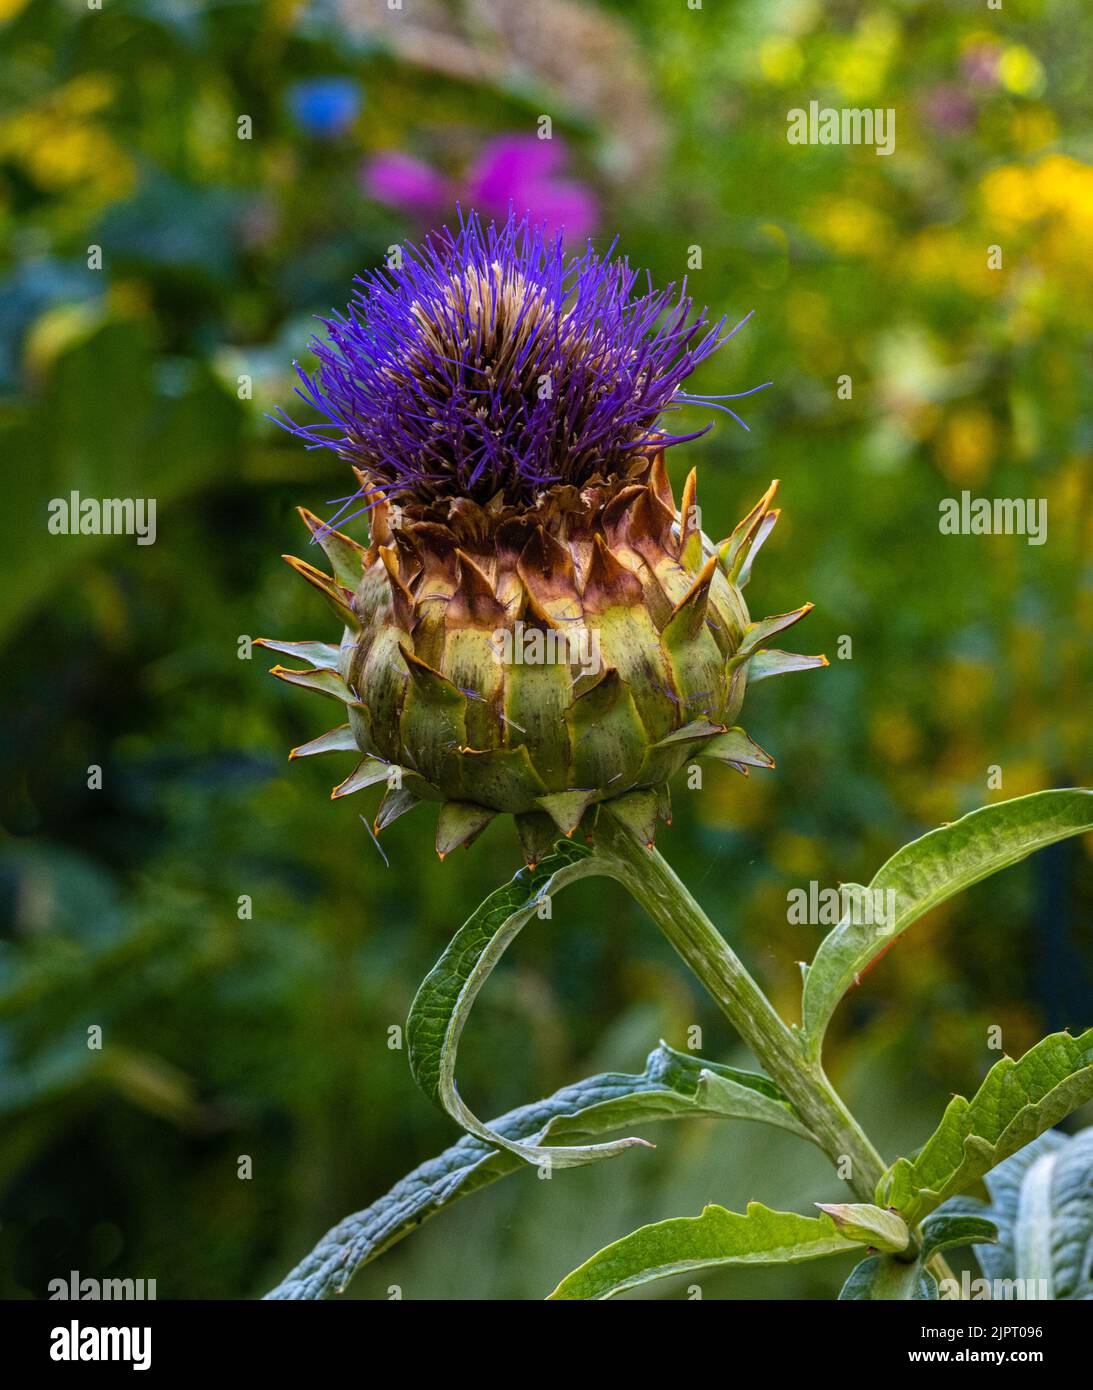 Cardoon, Cynara cardunculus. Head in full flower. Flowers are tiny purple strands surrounded by green. Stock Photo